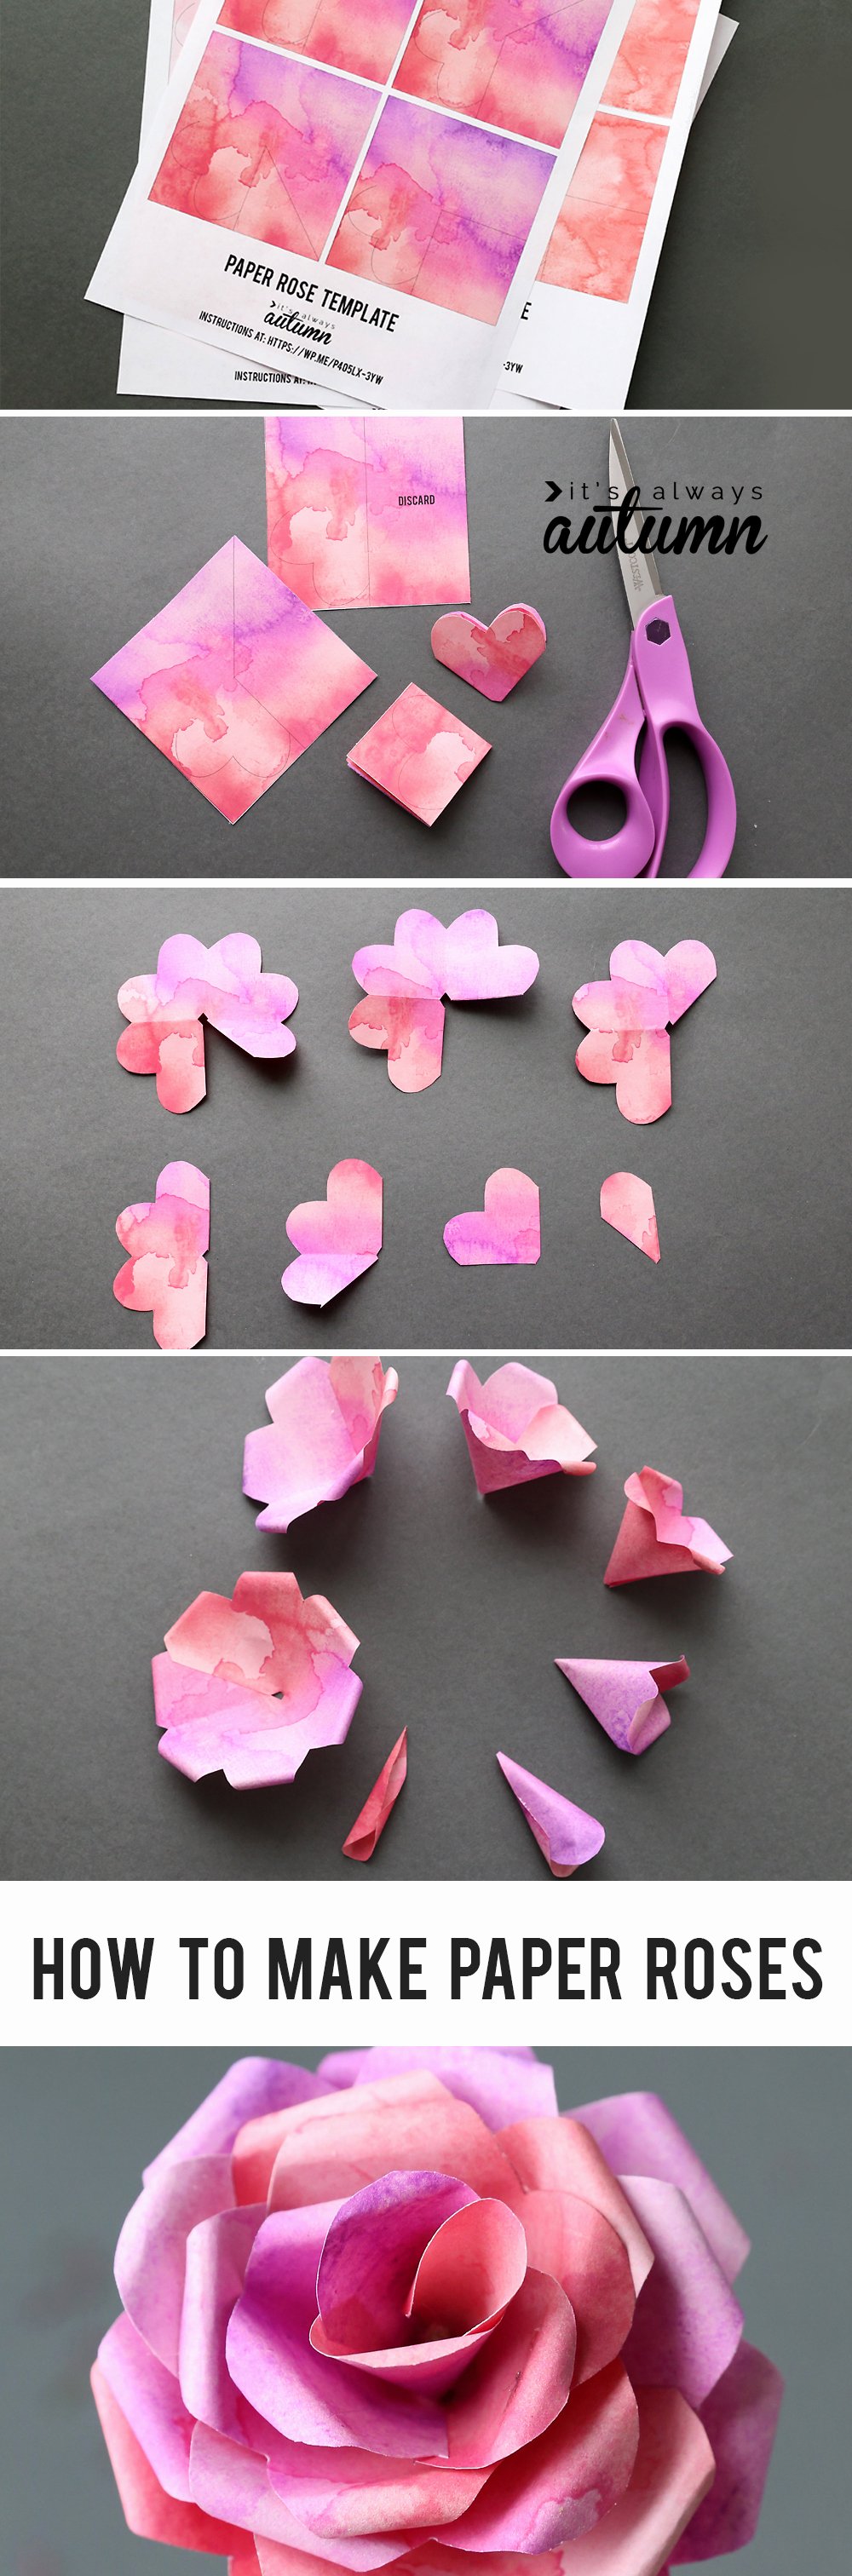 Template for Paper Flowers Inspirational Make Gorgeous Paper Roses with This Free Paper Rose